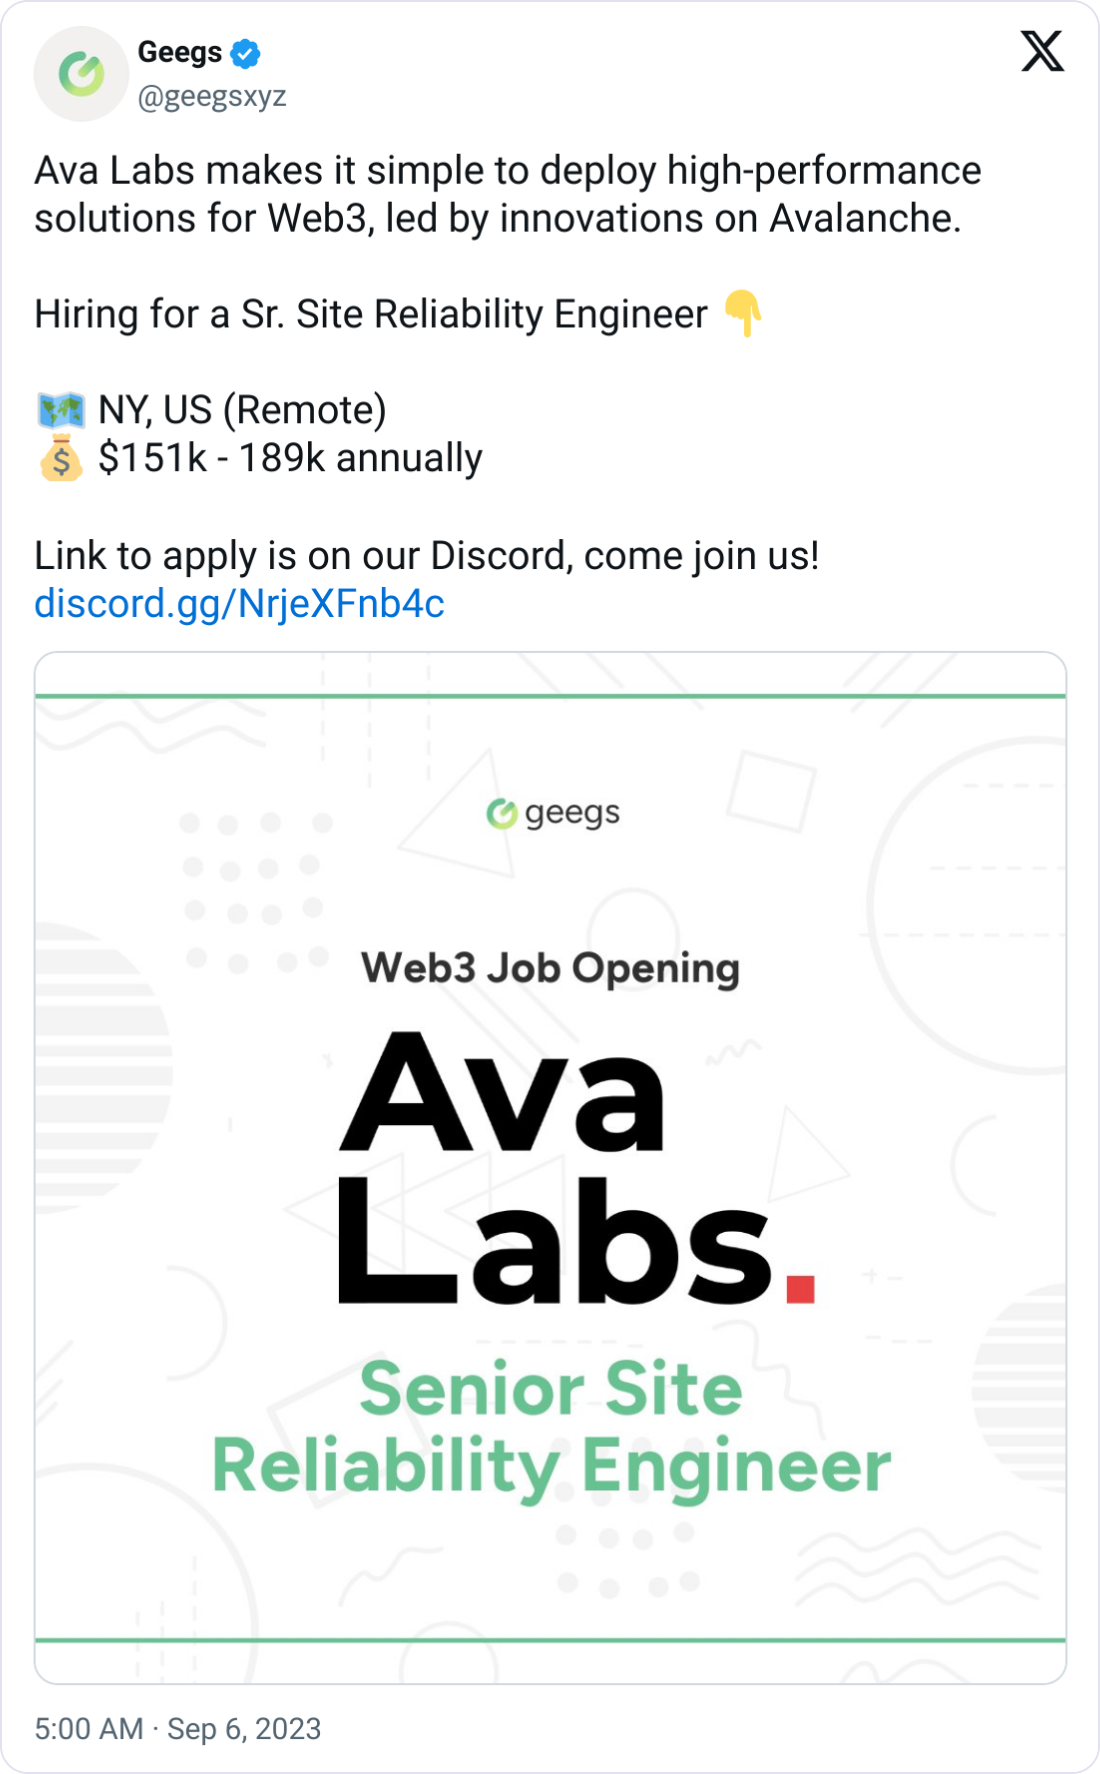 Geegs @geegsxyz Ava Labs makes it simple to deploy high-performance solutions for Web3, led by innovations on Avalanche.  Hiring for a Sr. Site Reliability Engineer 👇  🗺️ NY, US (Remote) 💰 $151k - 189k annually  Link to apply is on our Discord, come join us! https://discord.gg/NrjeXFnb4c